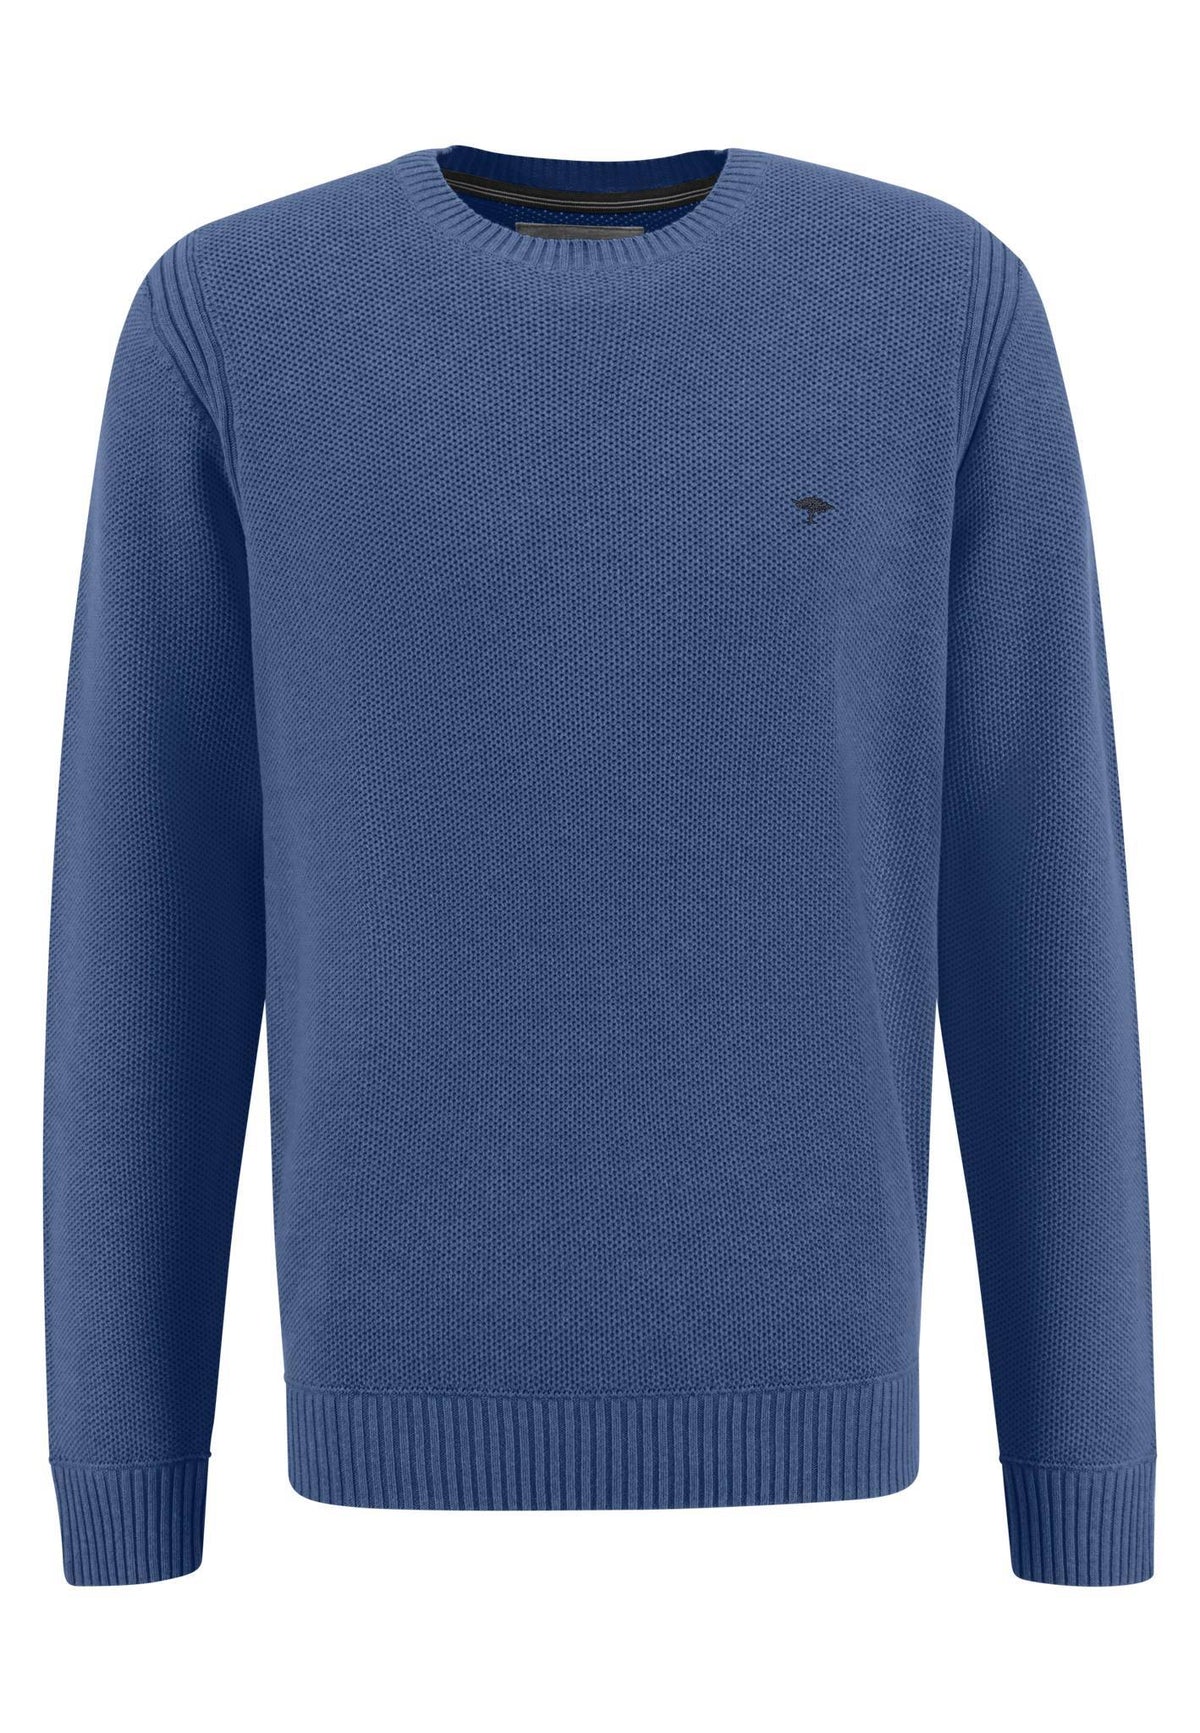 Fynch Hatton Knitted O-Neck Sweater - Blue